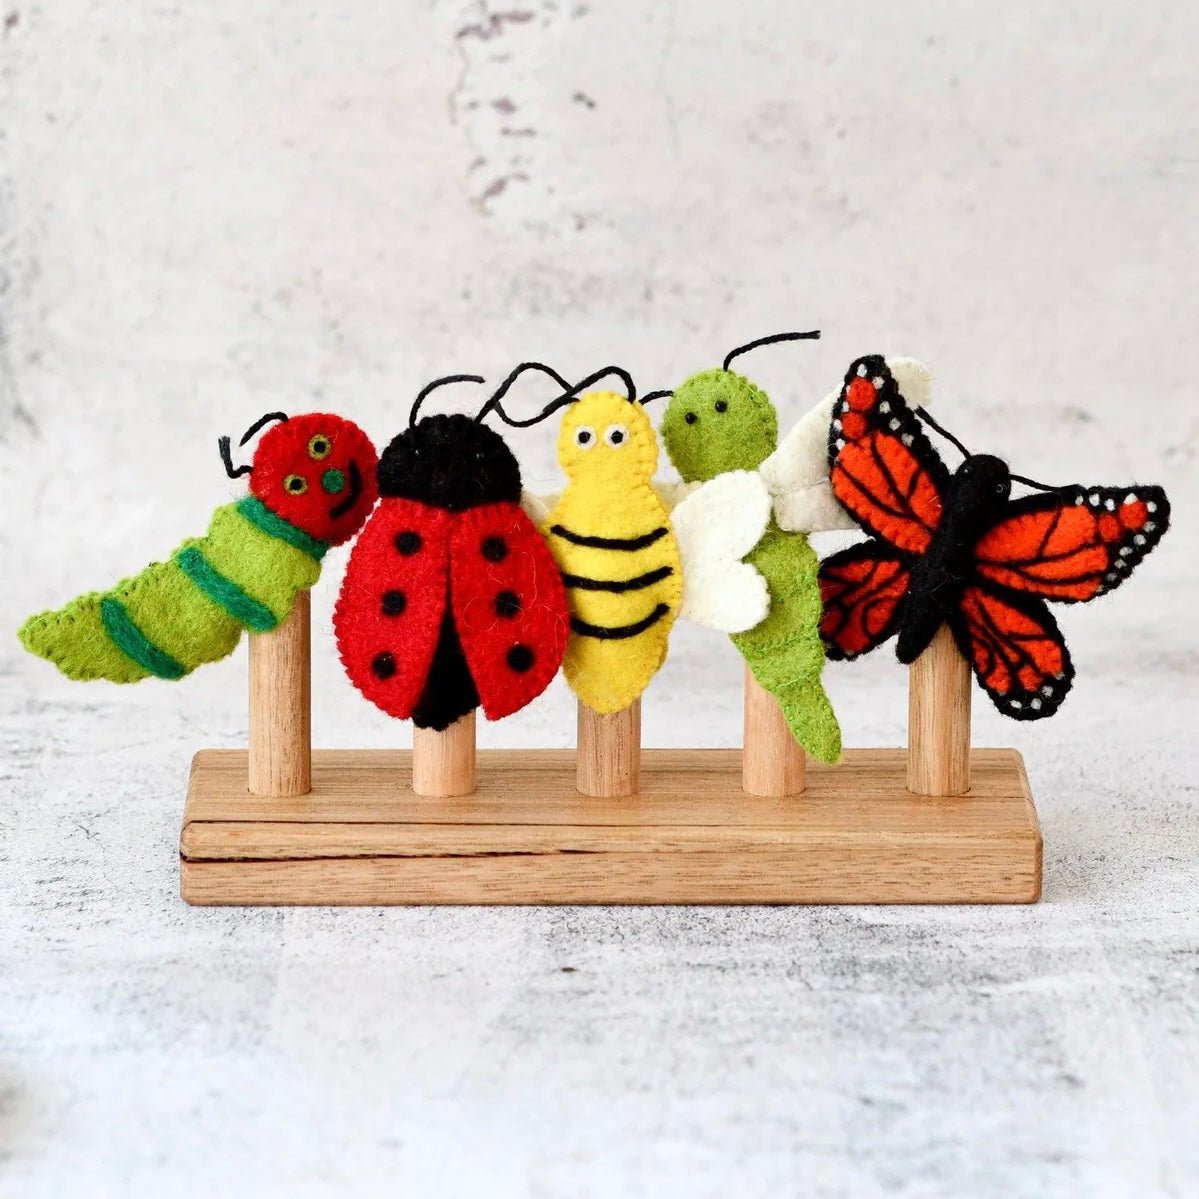 Felt bugs and insects finger puppets